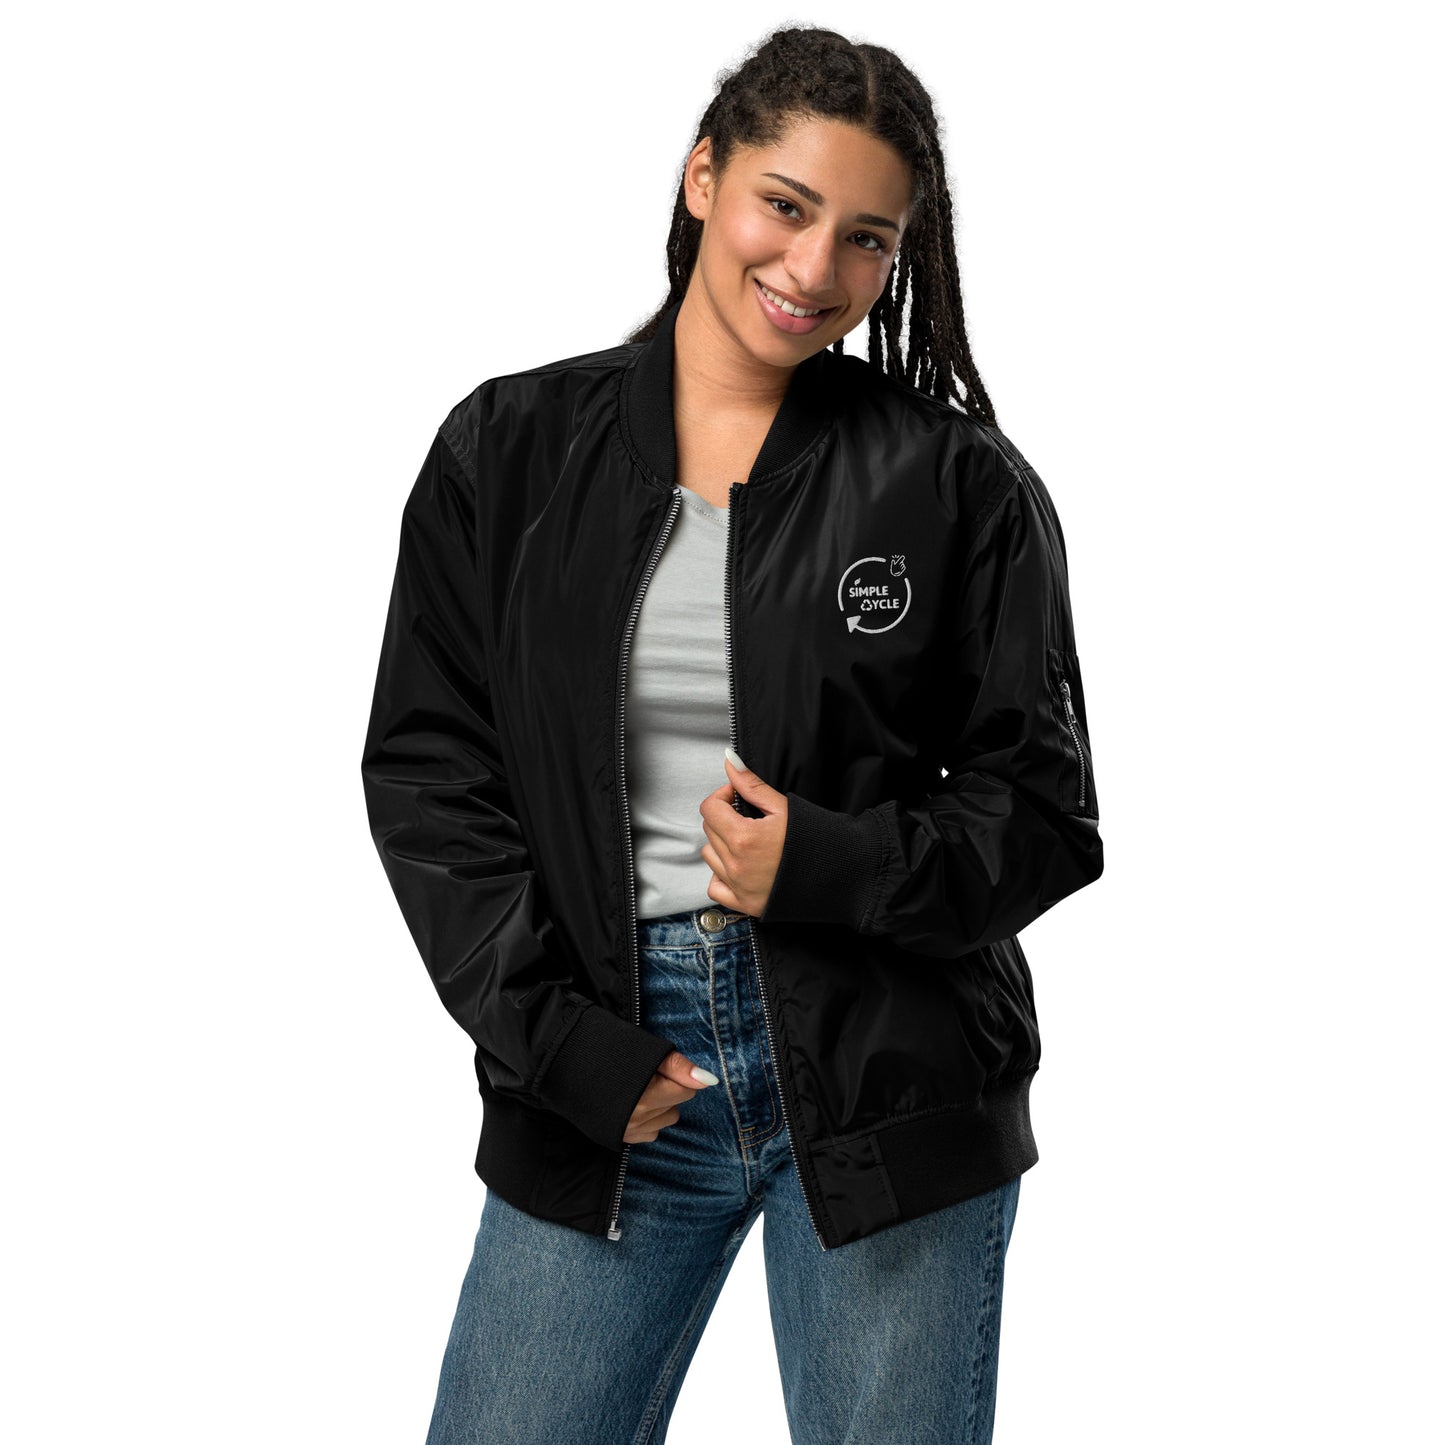 SimpleCycle Embroidered Premium Recycled Bomber Jacket black on a female model